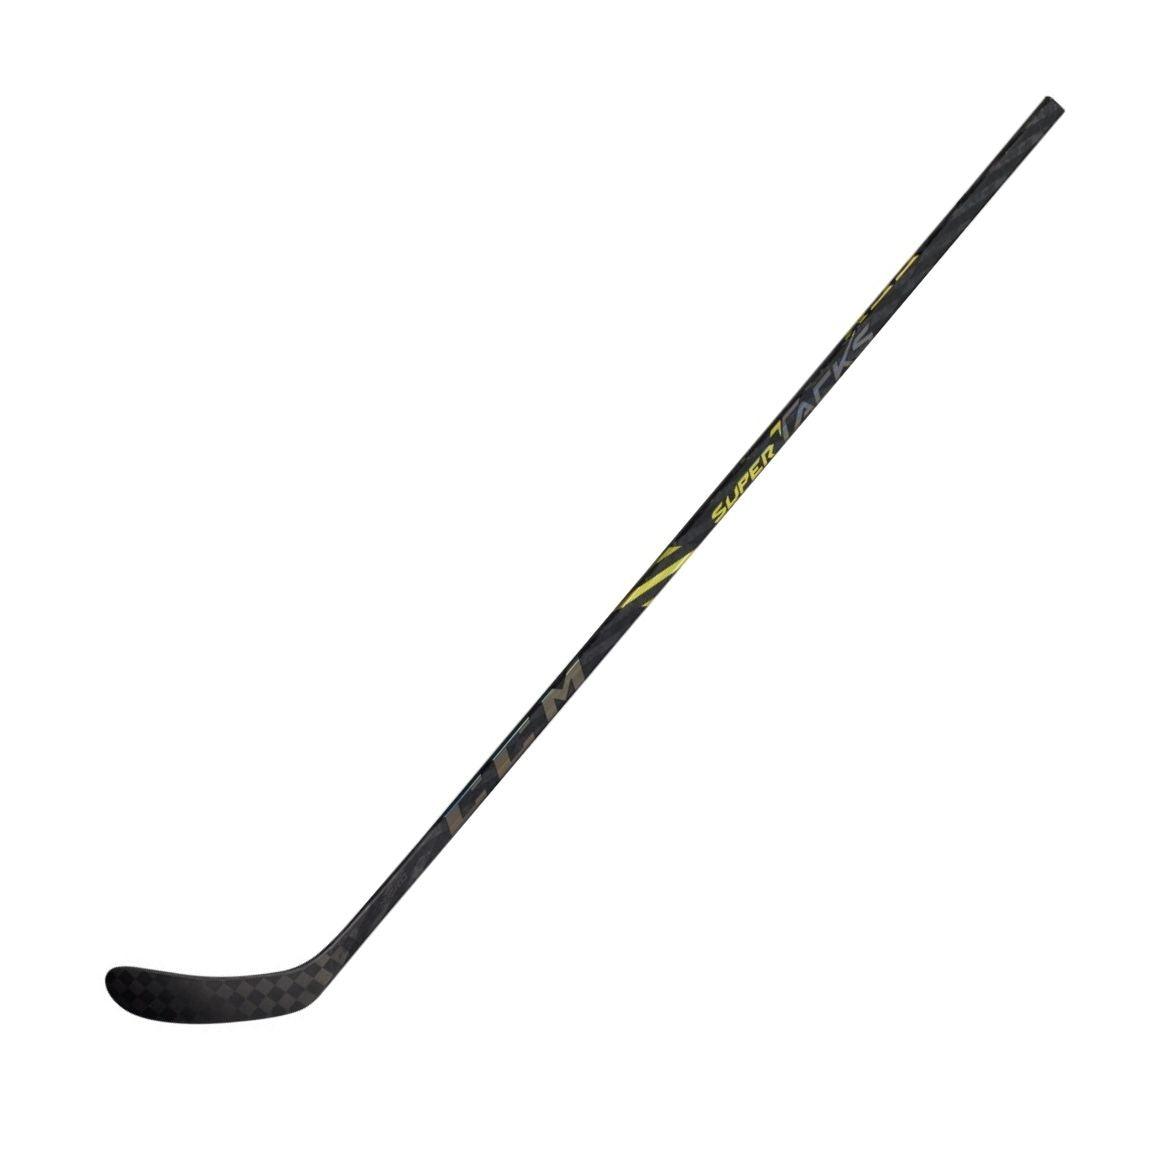 Super Tacks AS4 Pro Hockey Stick - Junior - Sports Excellence